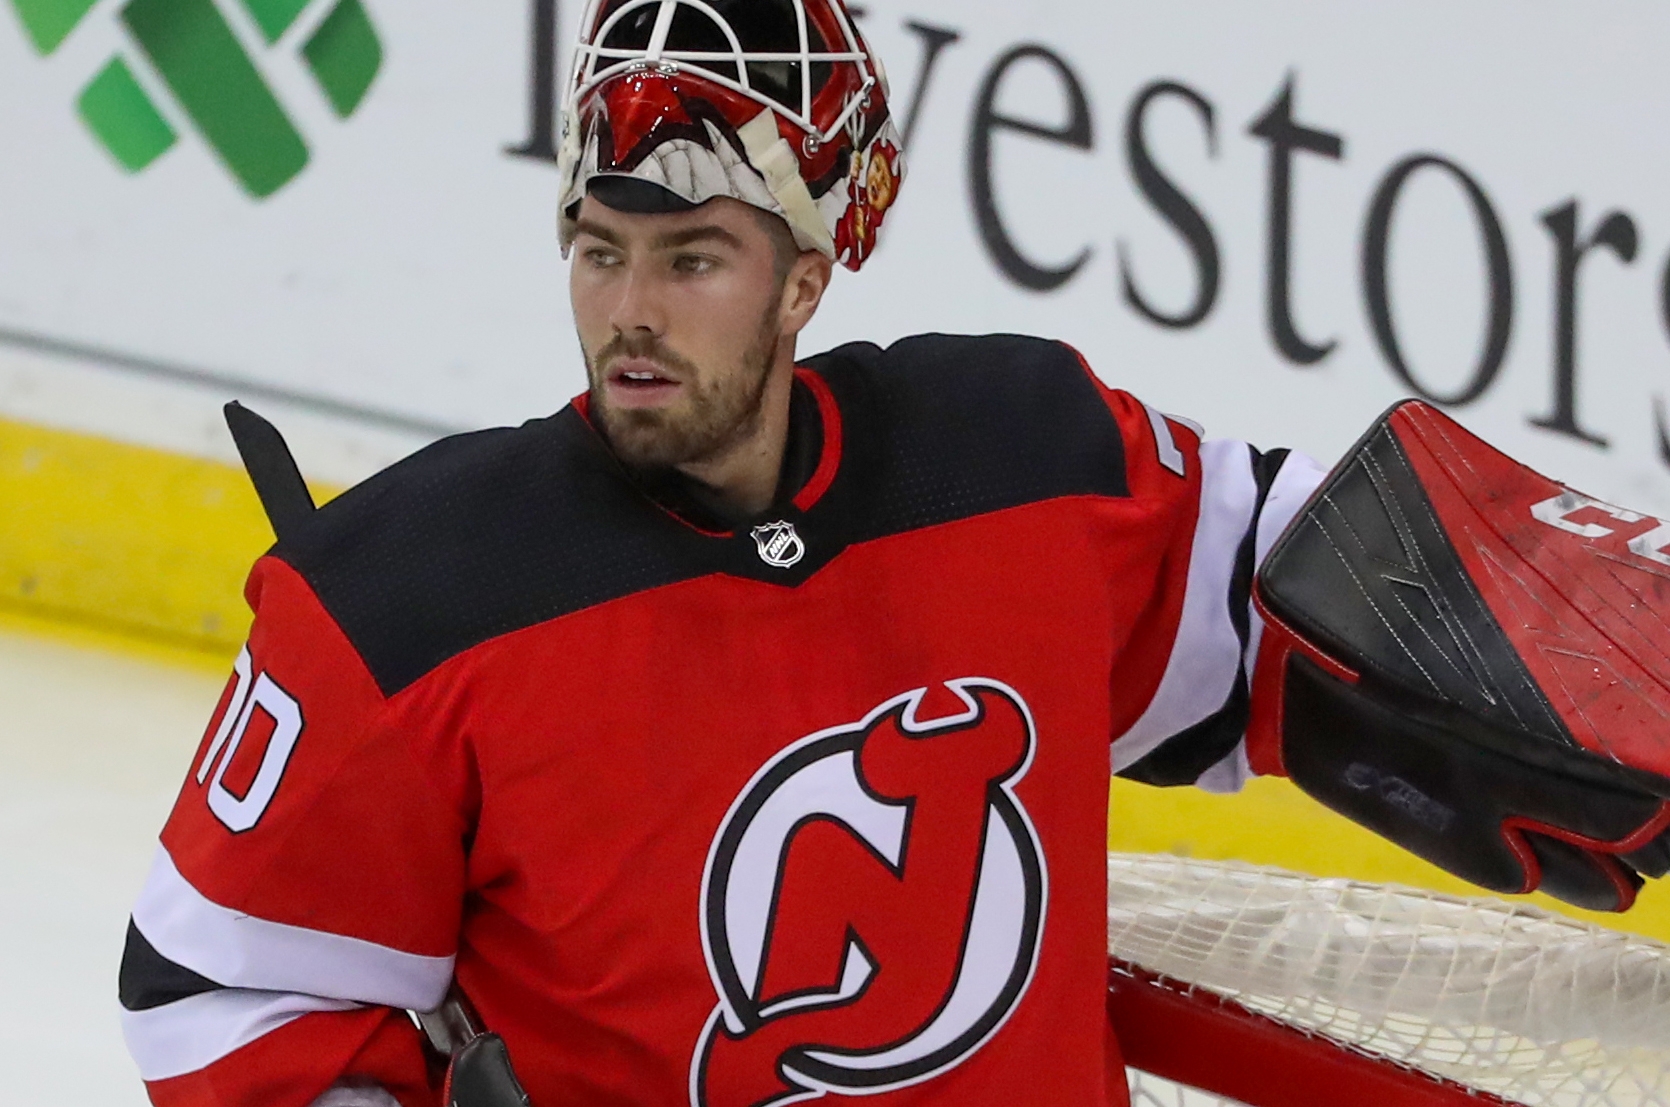 Hockey from across the Pond: NHL - New Jersey Devils Profile